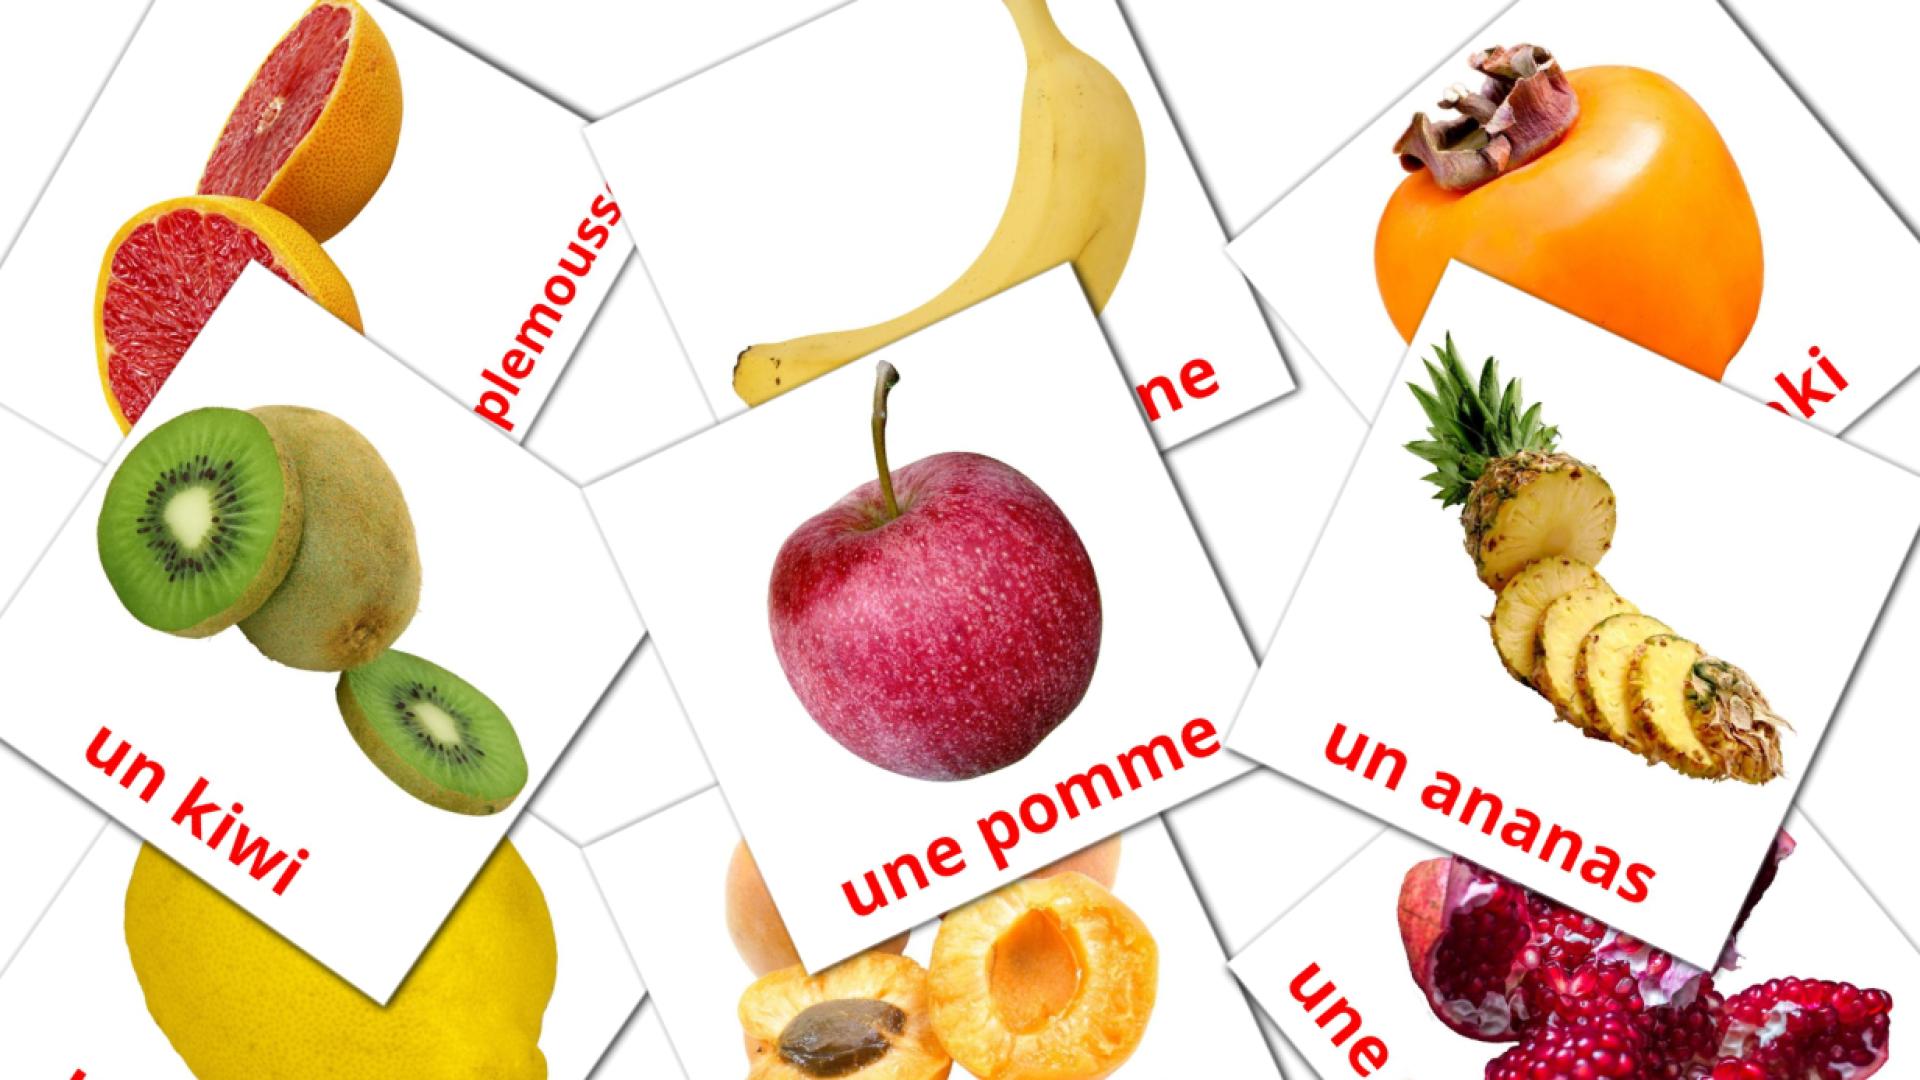 Les Fruits flashcards